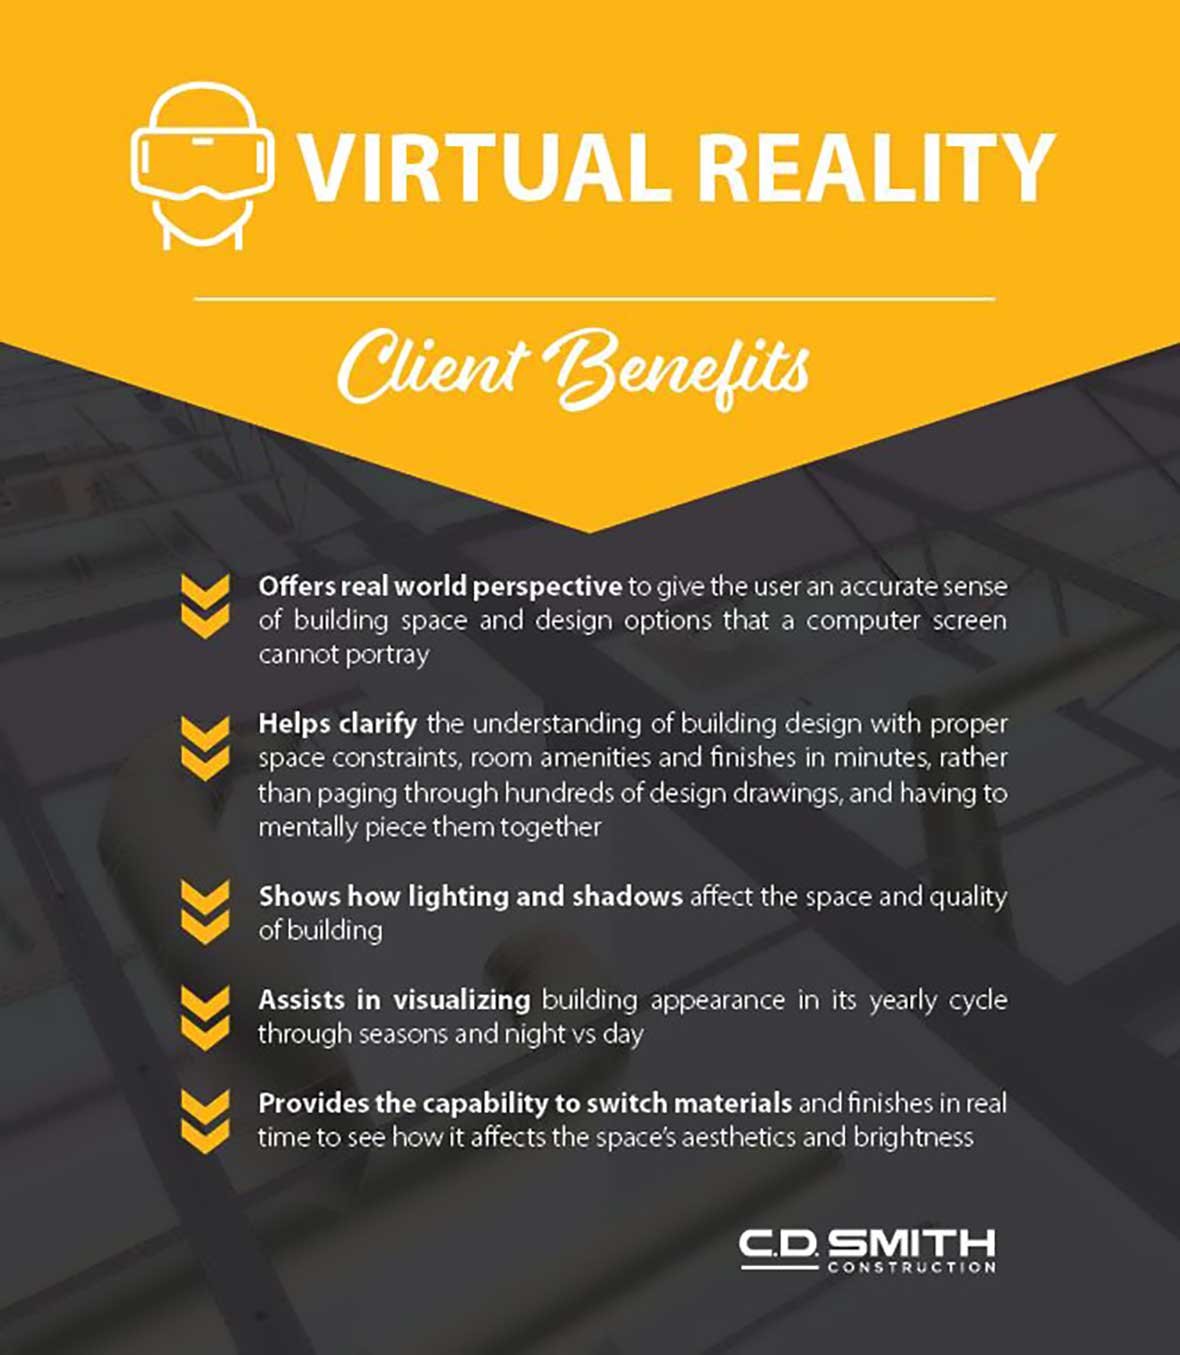 C.D. Smith Construction Virtual Reality Client Benefits